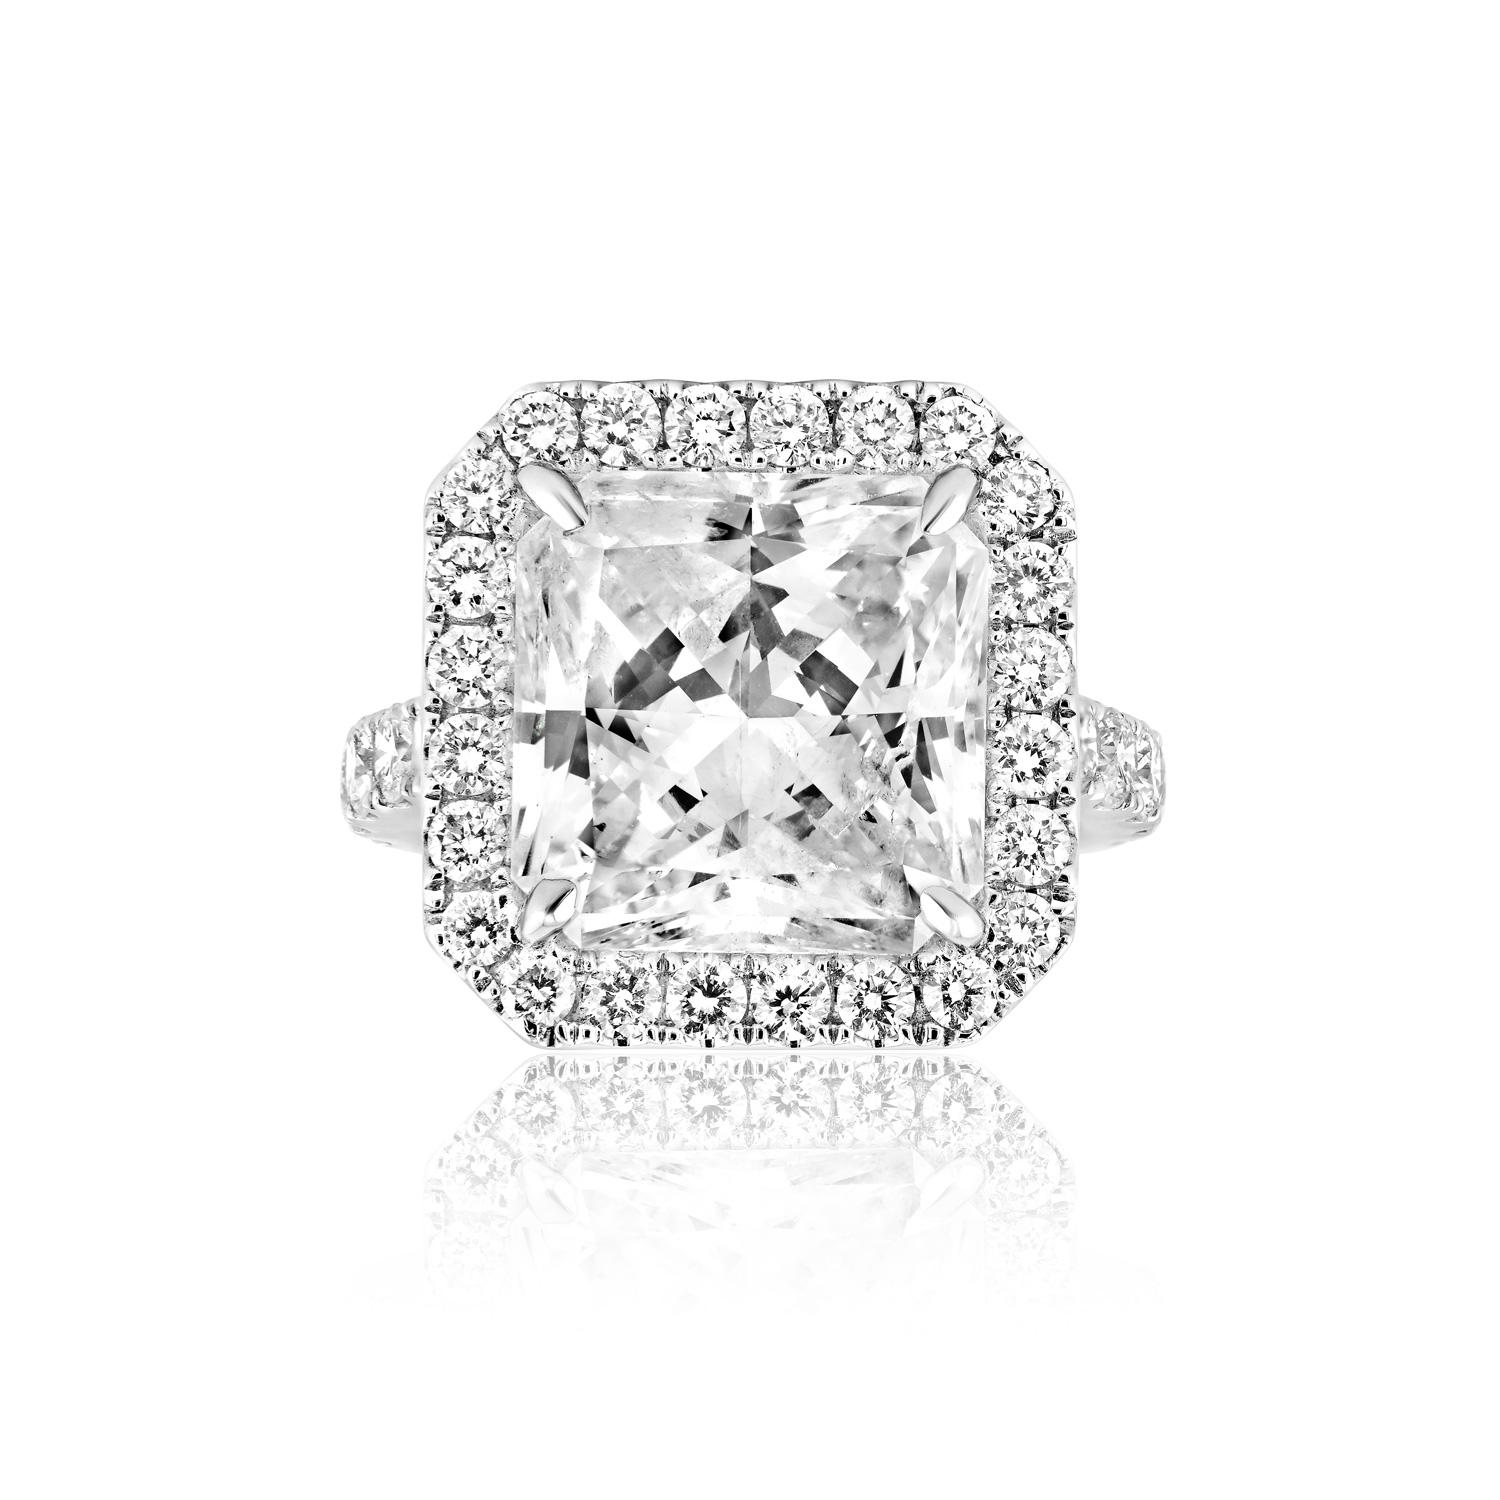 
Center Diamond:

Carat Weight: 10.45 Carats
Style: Radiant Cut - Feather Filled- Special Care Required 

Ring:
Setting: Halo, Sidestone & 4 Round Prong
Metal: 18 Karat White Gold 8.80 Grams
Style: Round Brilliant Cut 
Carat Weight: 2.05